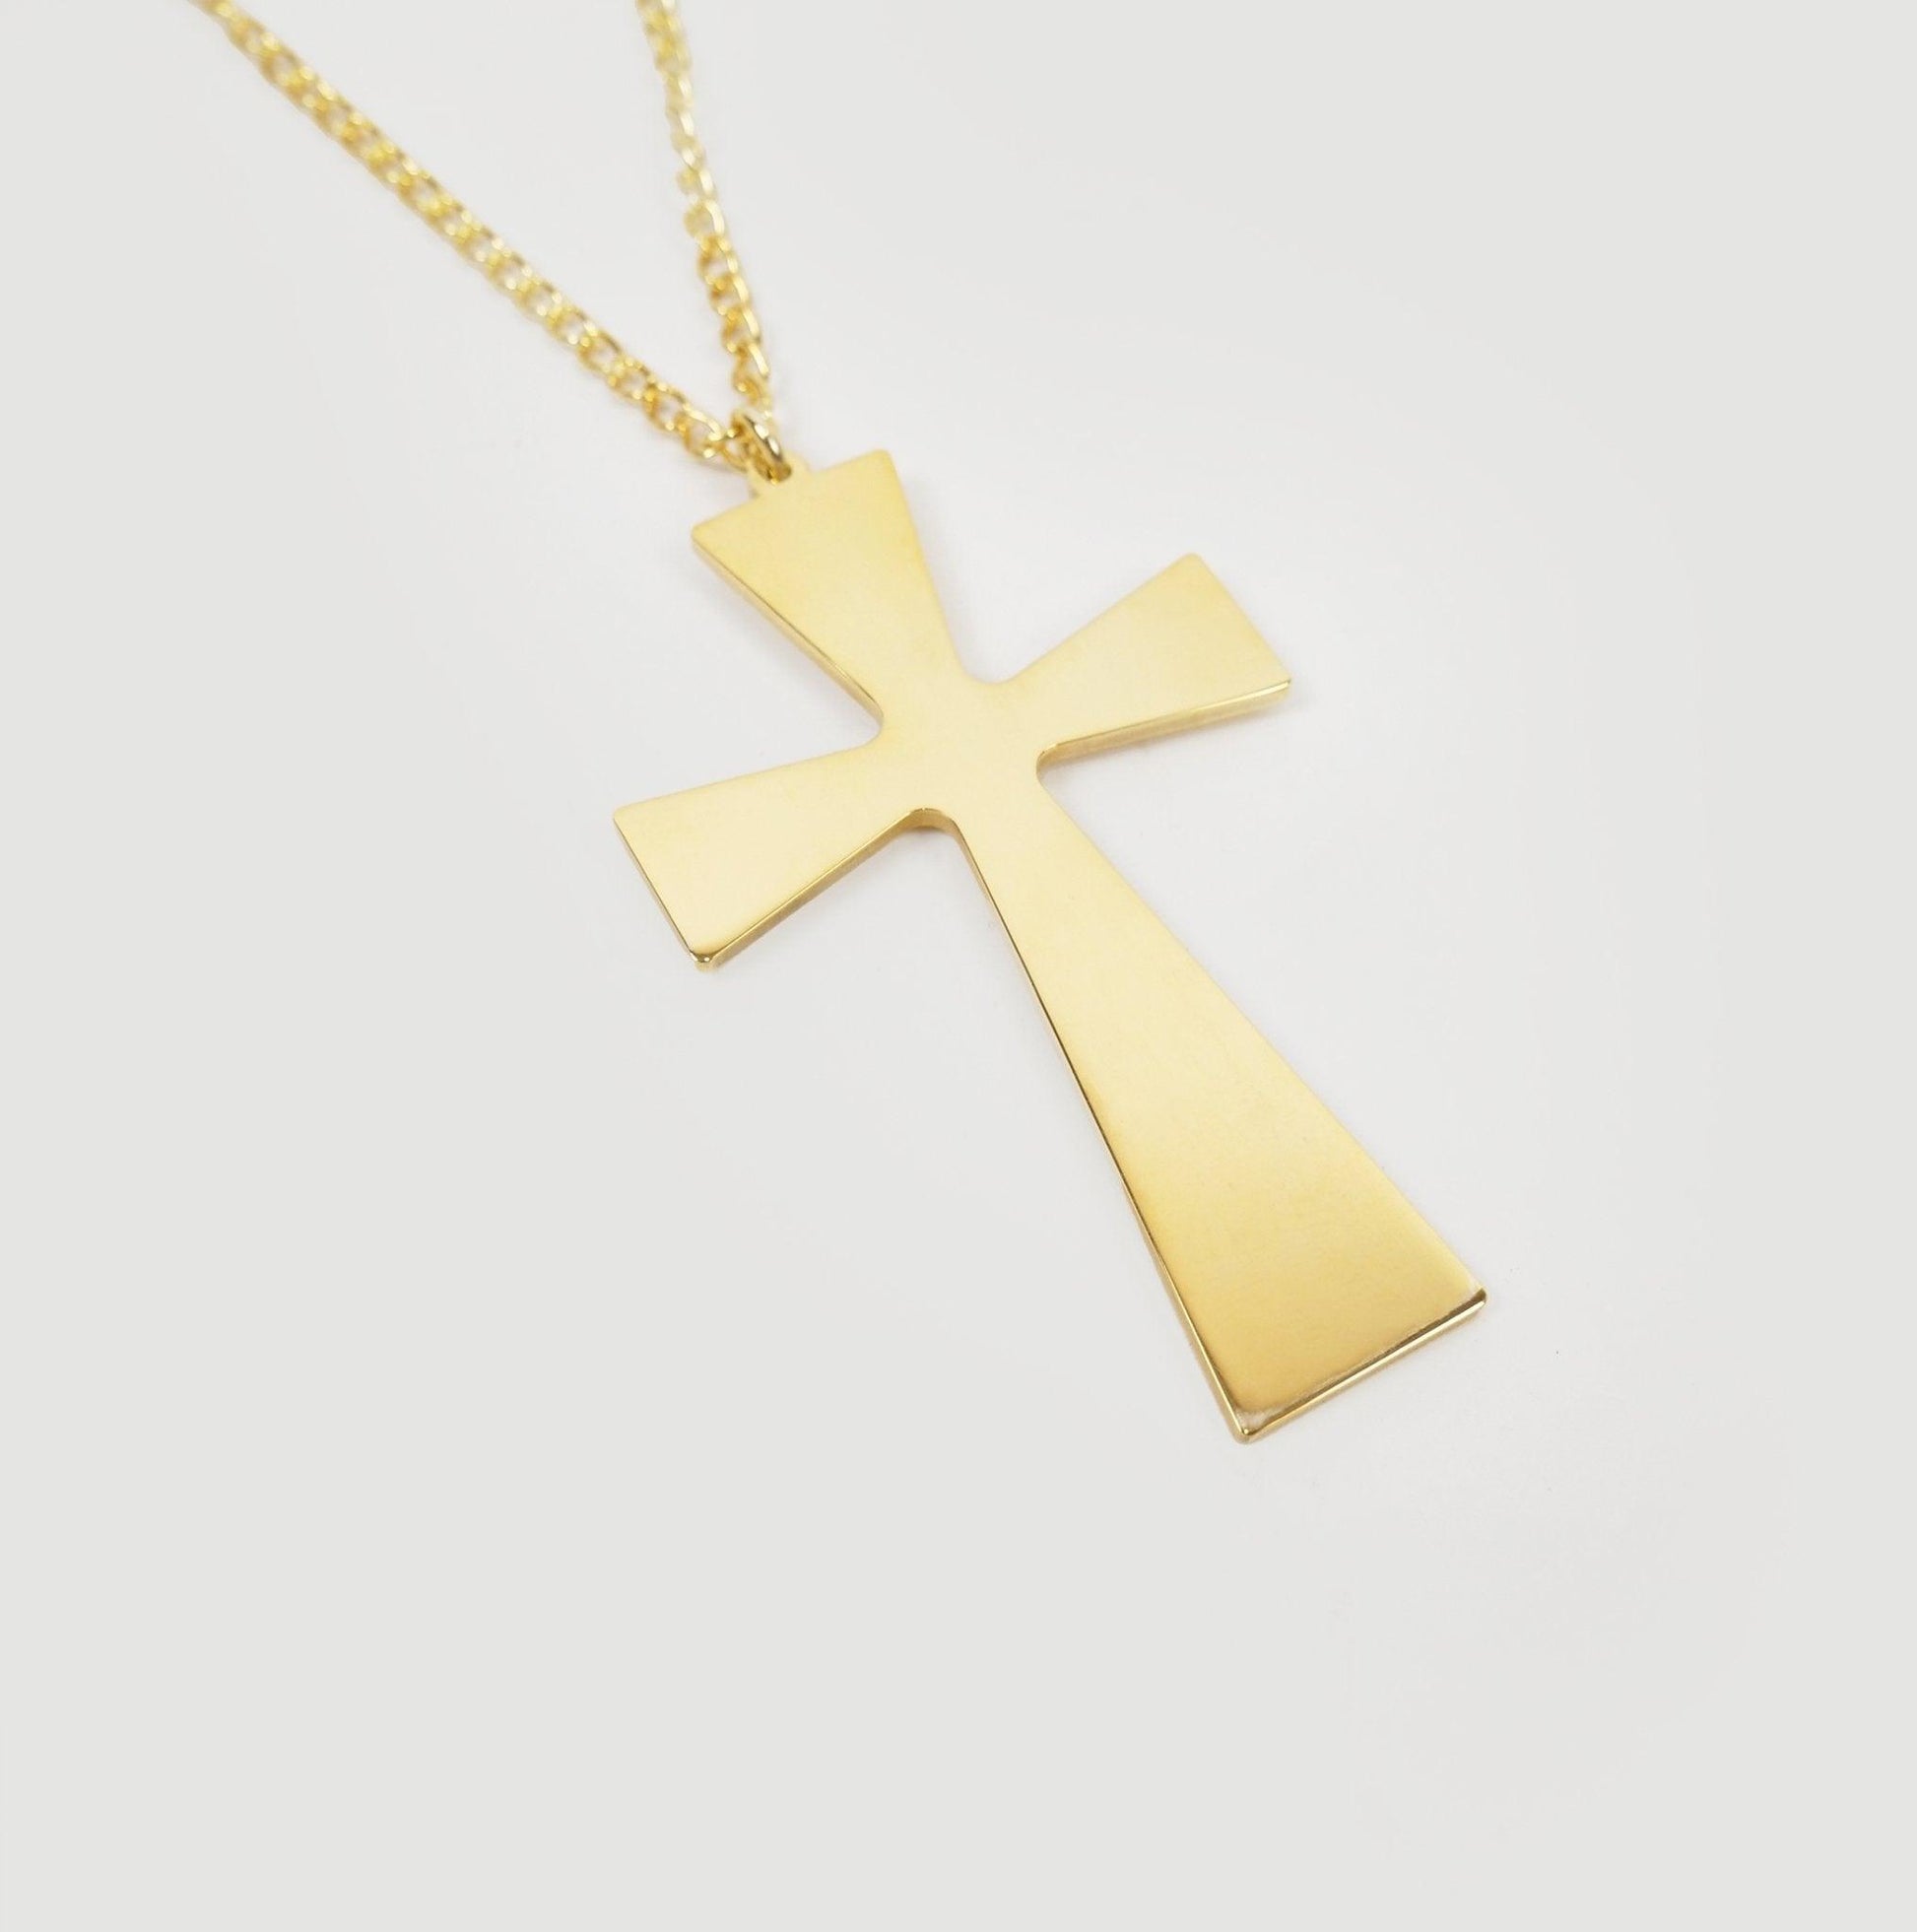 3" gold plated pectoral cross - Watts & Co.